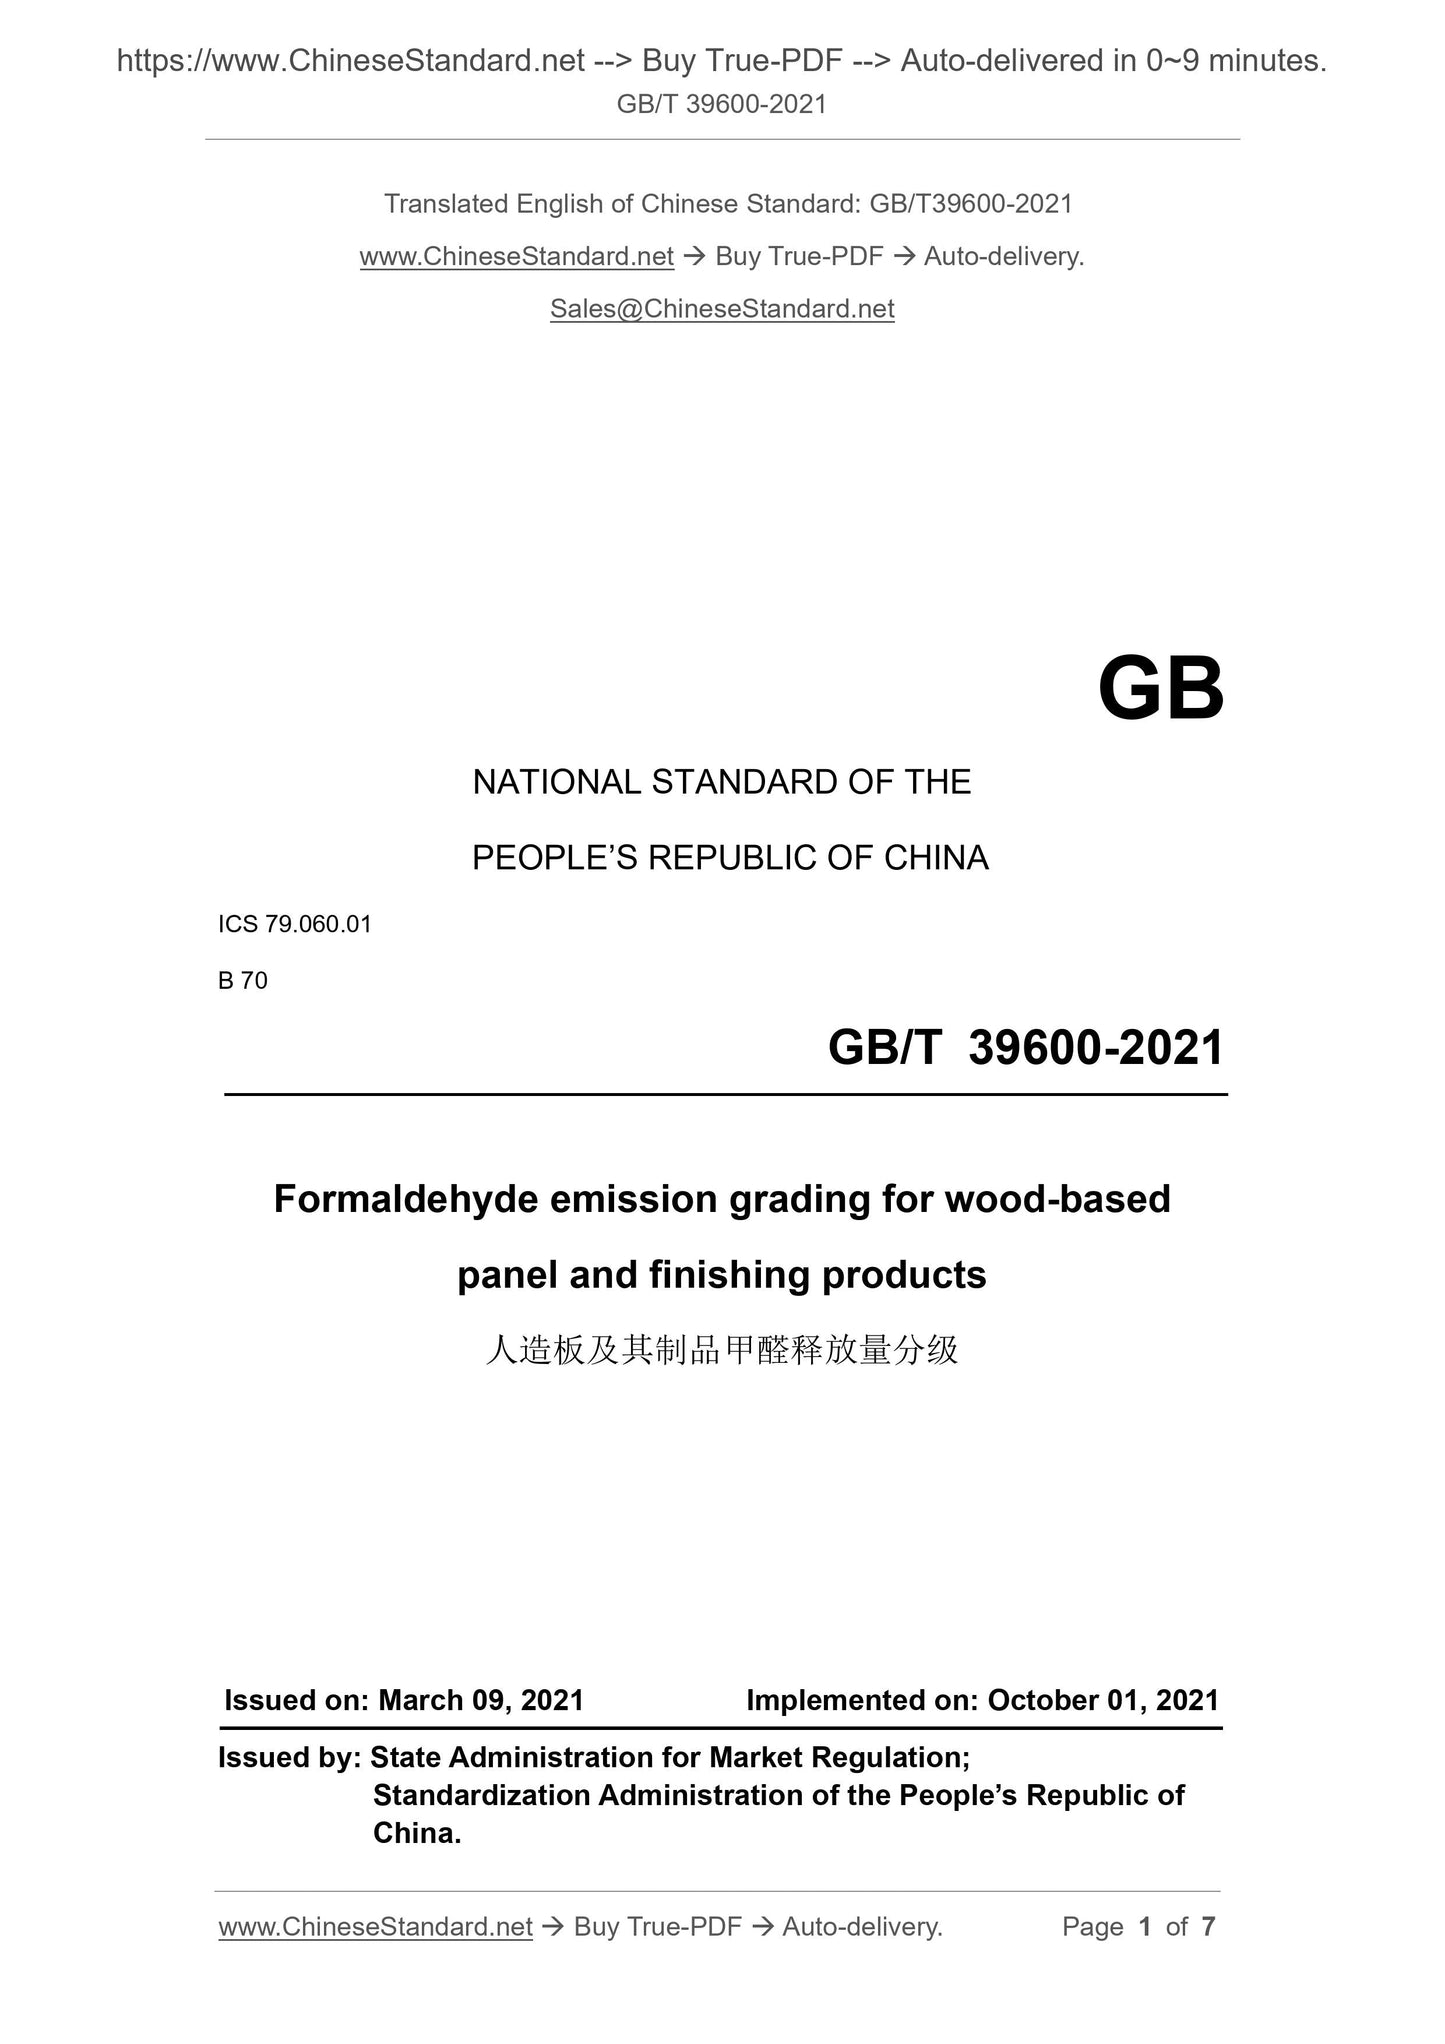 GB/T 39600-2021 Page 1